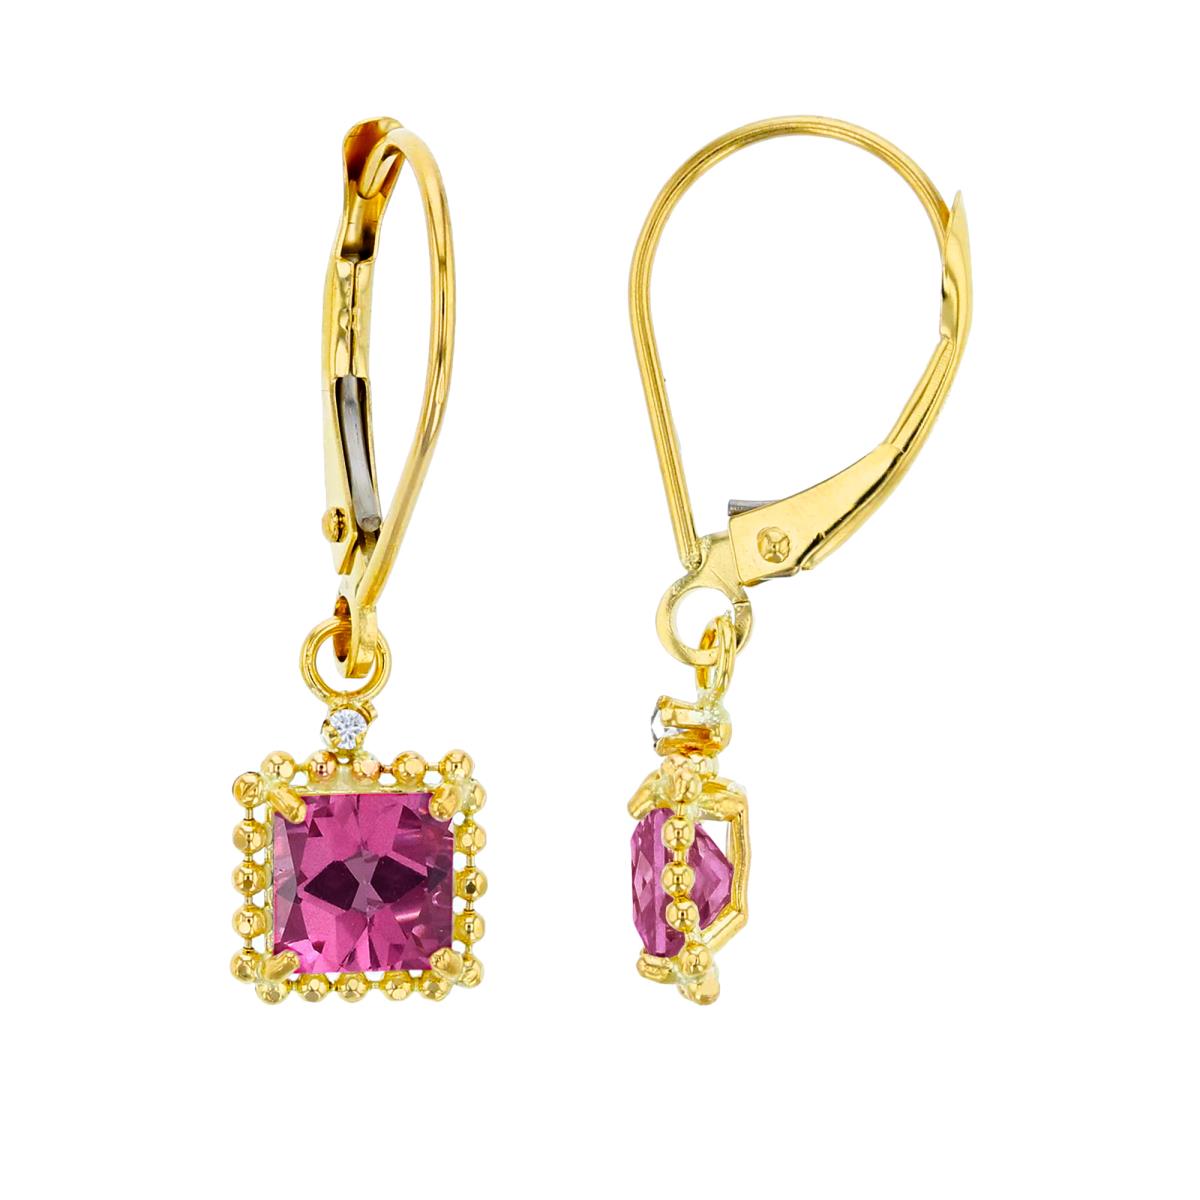 14K Yellow Gold 1.25mm Rd Created White Sapphire & 5mm Sq Pure Pink Bead Frame Drop Lever-Back Earring